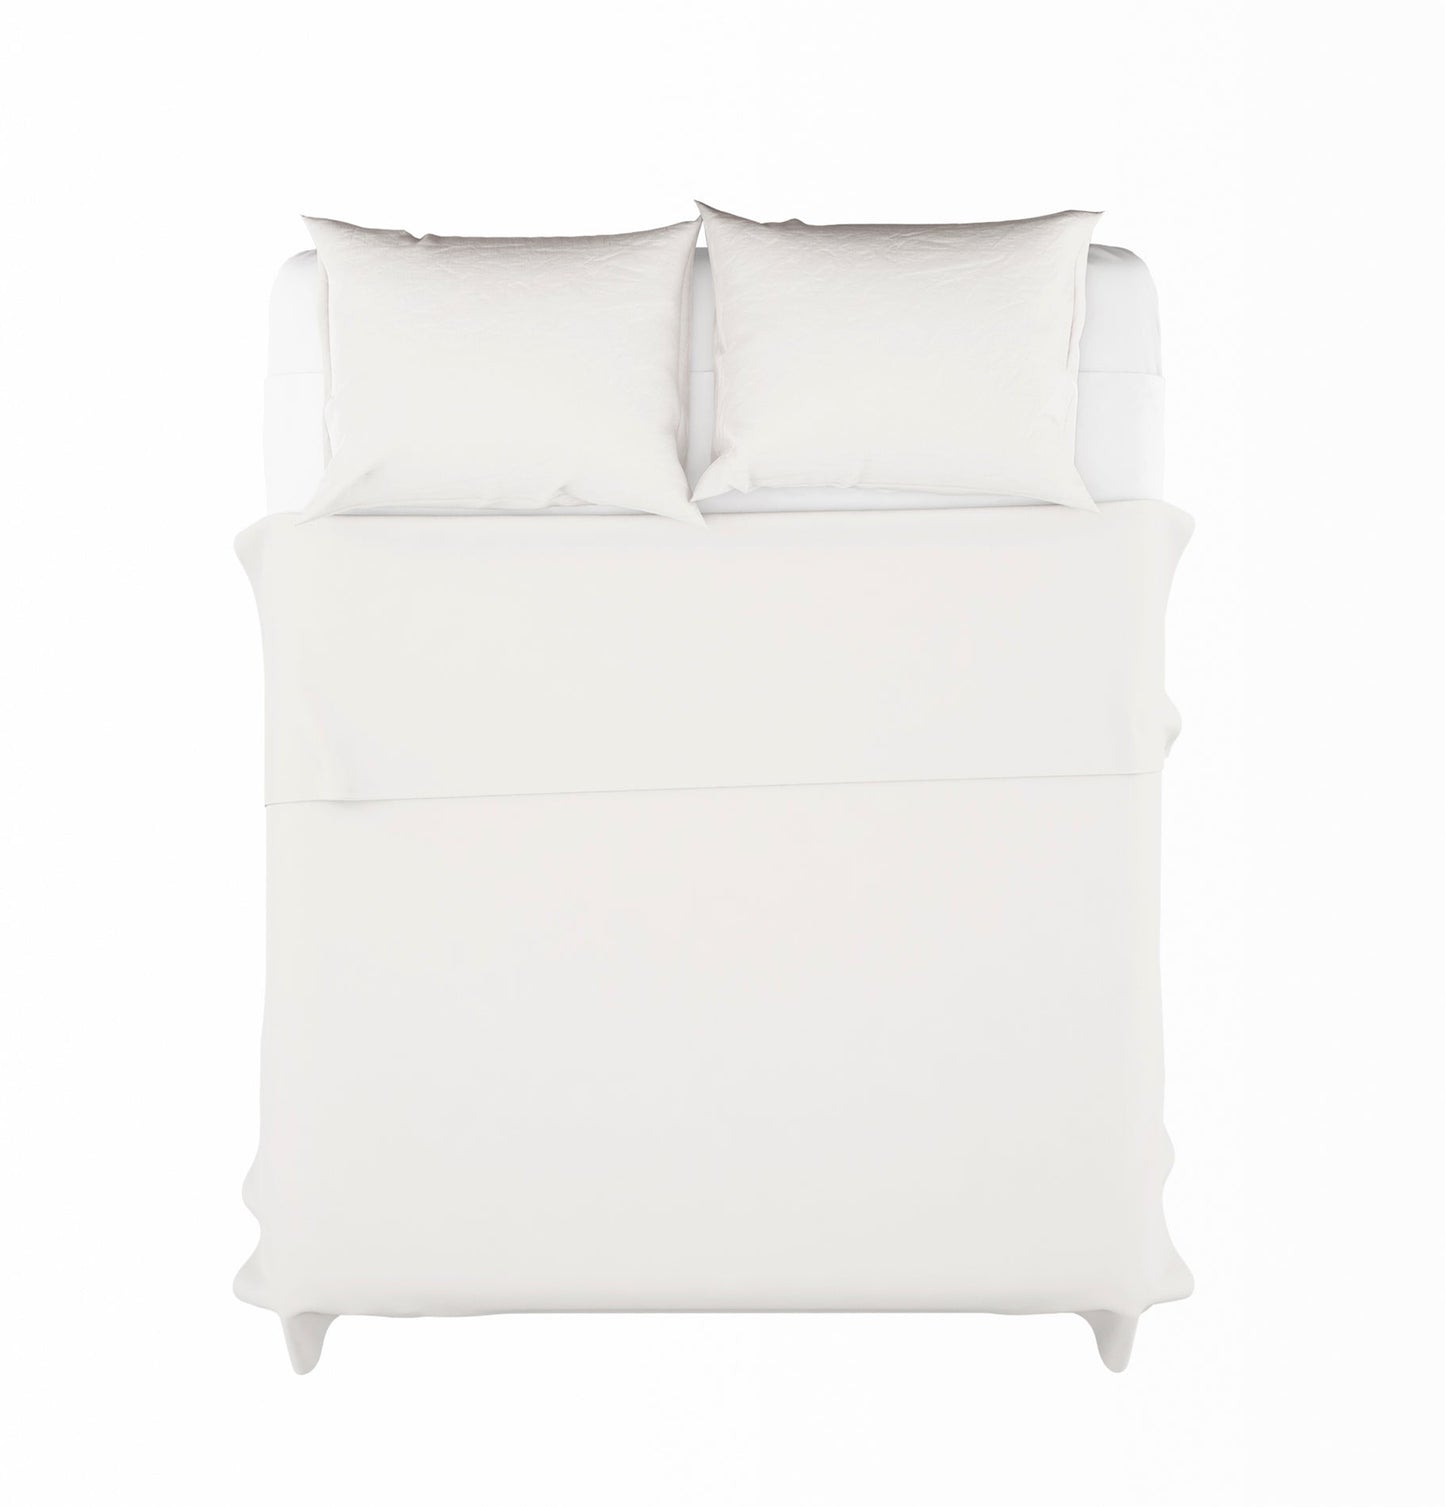 Smooth Top Sheet Percale 200h White Bed 180